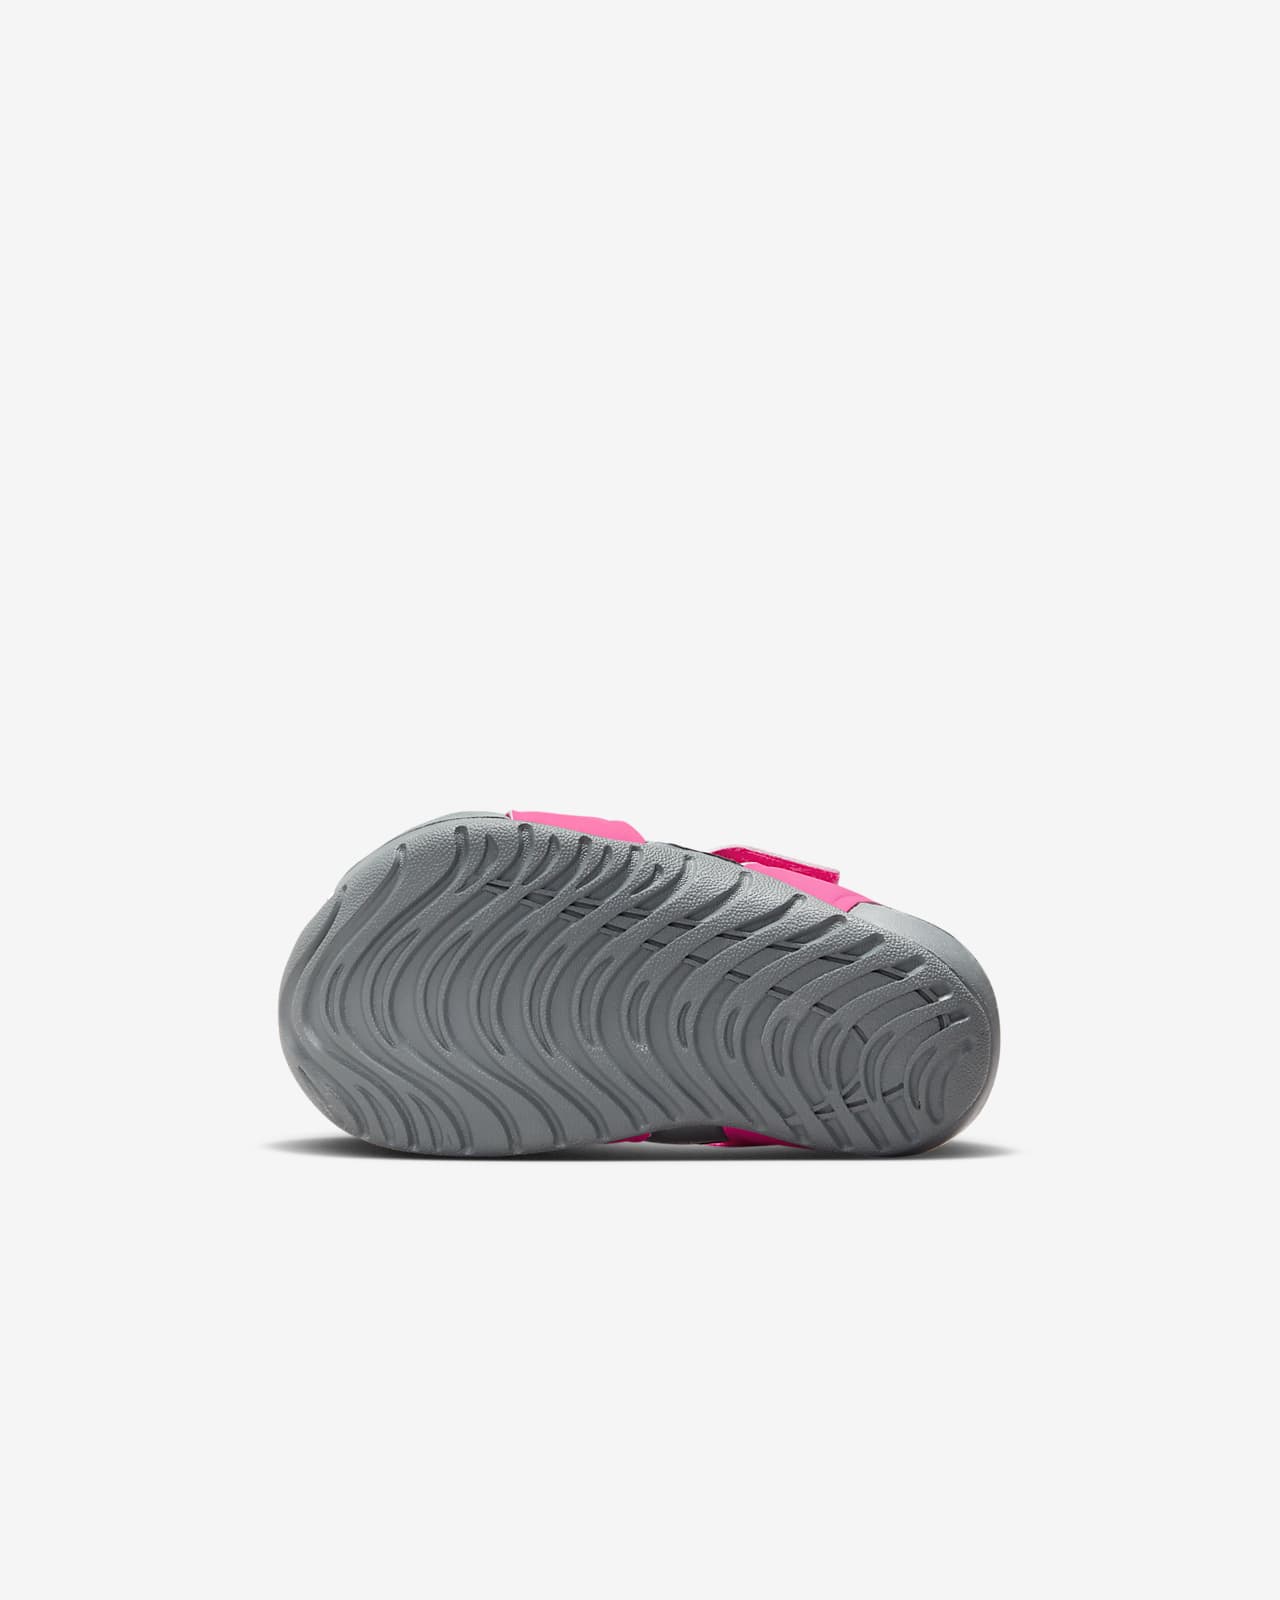 Nike Protect Baby/Toddler Sandals.